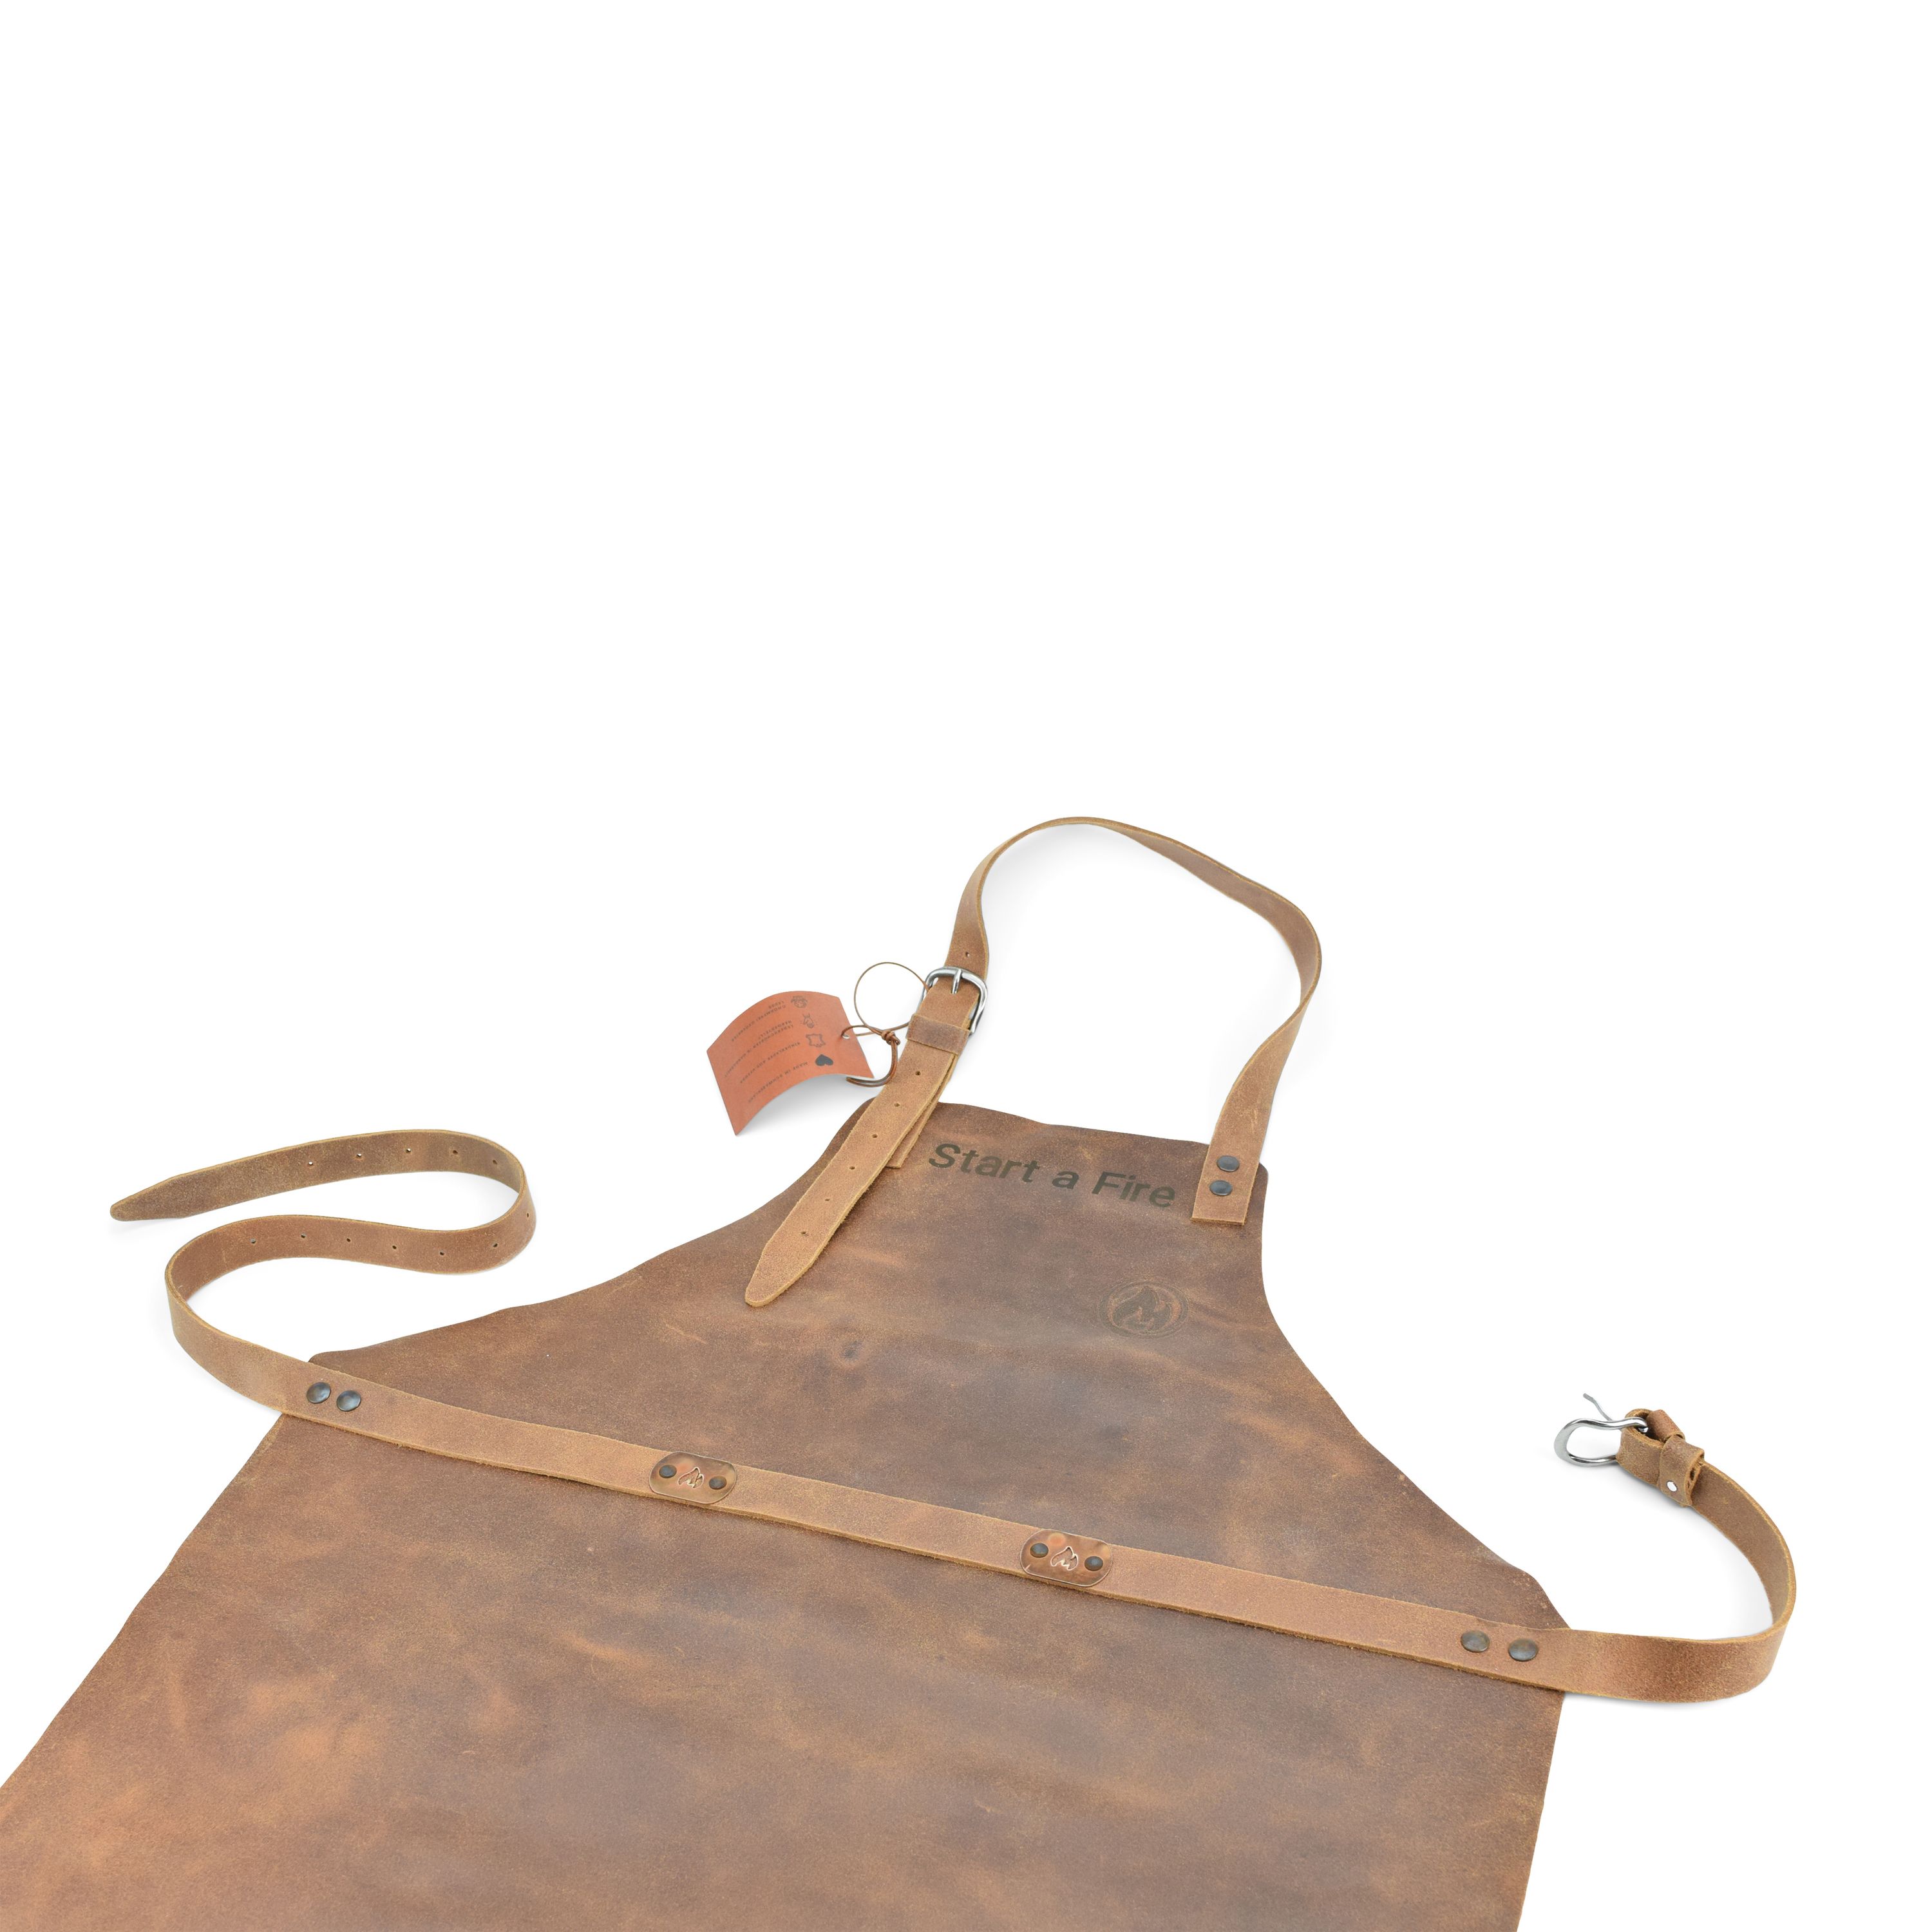 Buffalo Leather Barbecue Apron made of Italian leather with copper fittings